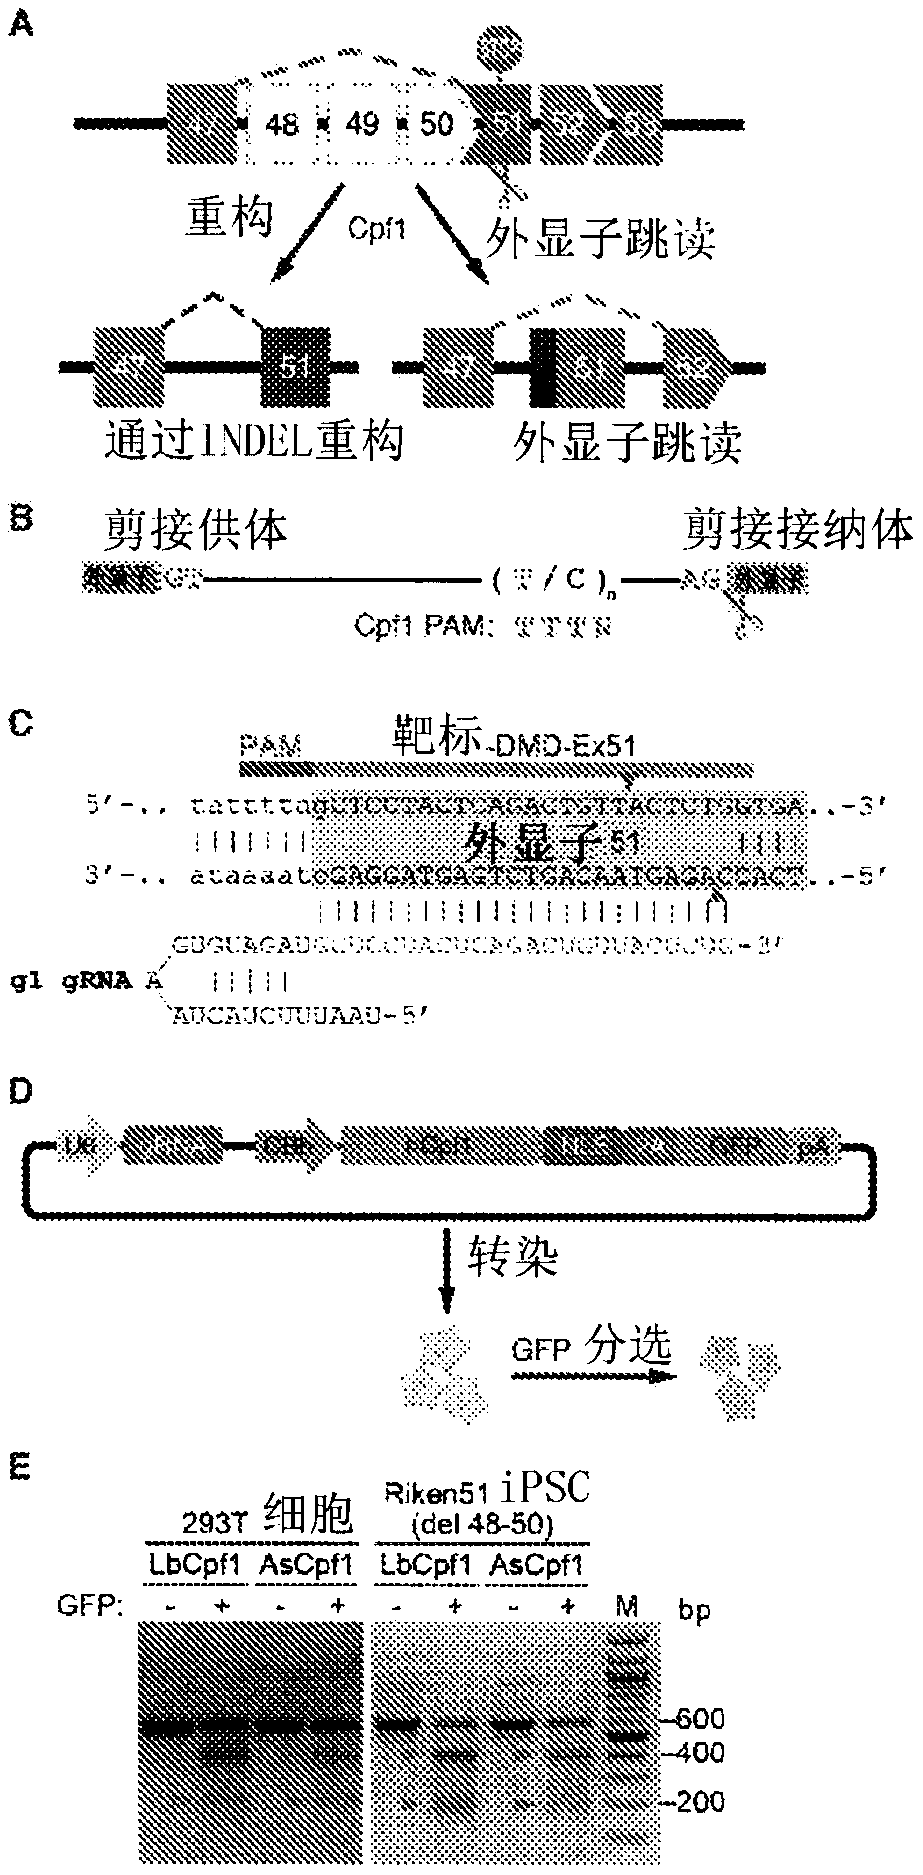 Prevention of muscular dystrophy by crispr/cpf1-mediated gene editing